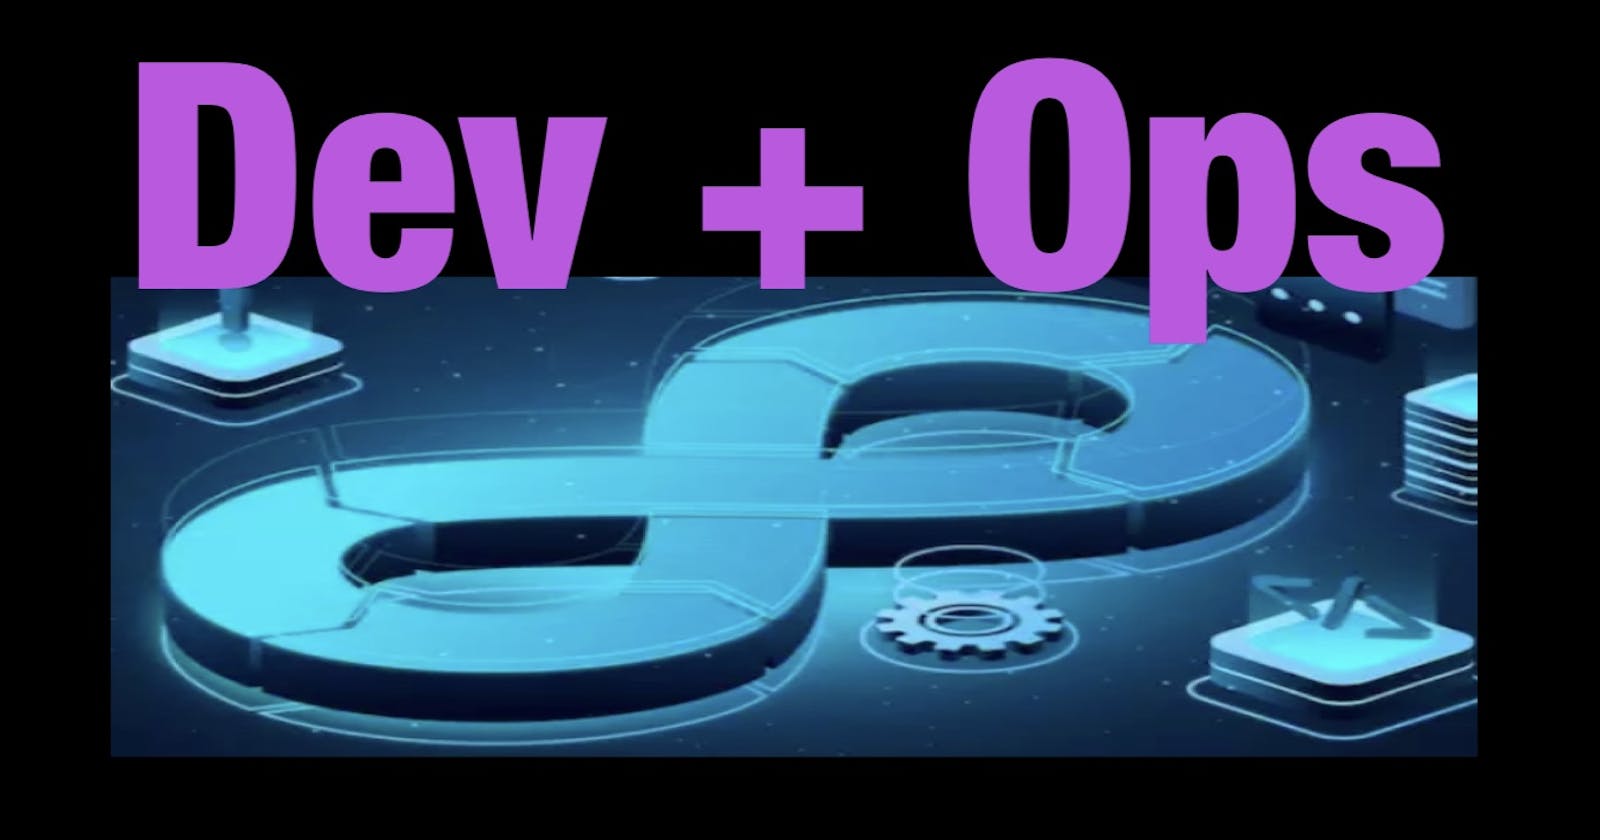 DevOps Day2day Activities: Dev & Ops Made Easy